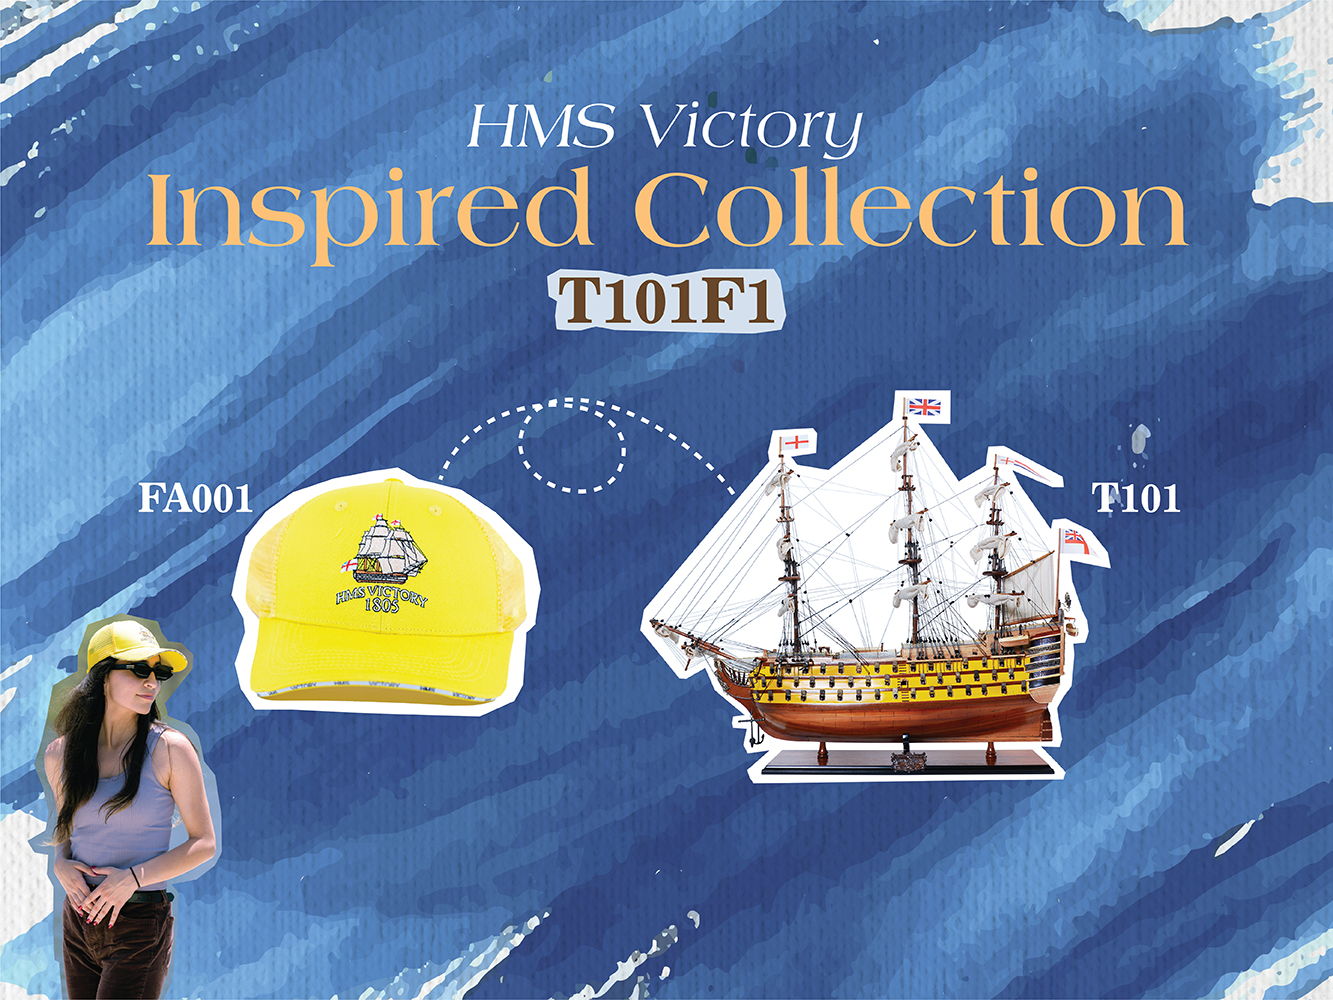 T101F1 Ultimate HMS Victory Combo: A Model Ship and Classic Hat t101f1-ultimate-hms-victory-combo-a-model-ship-and-classic-hat-l01.jpg